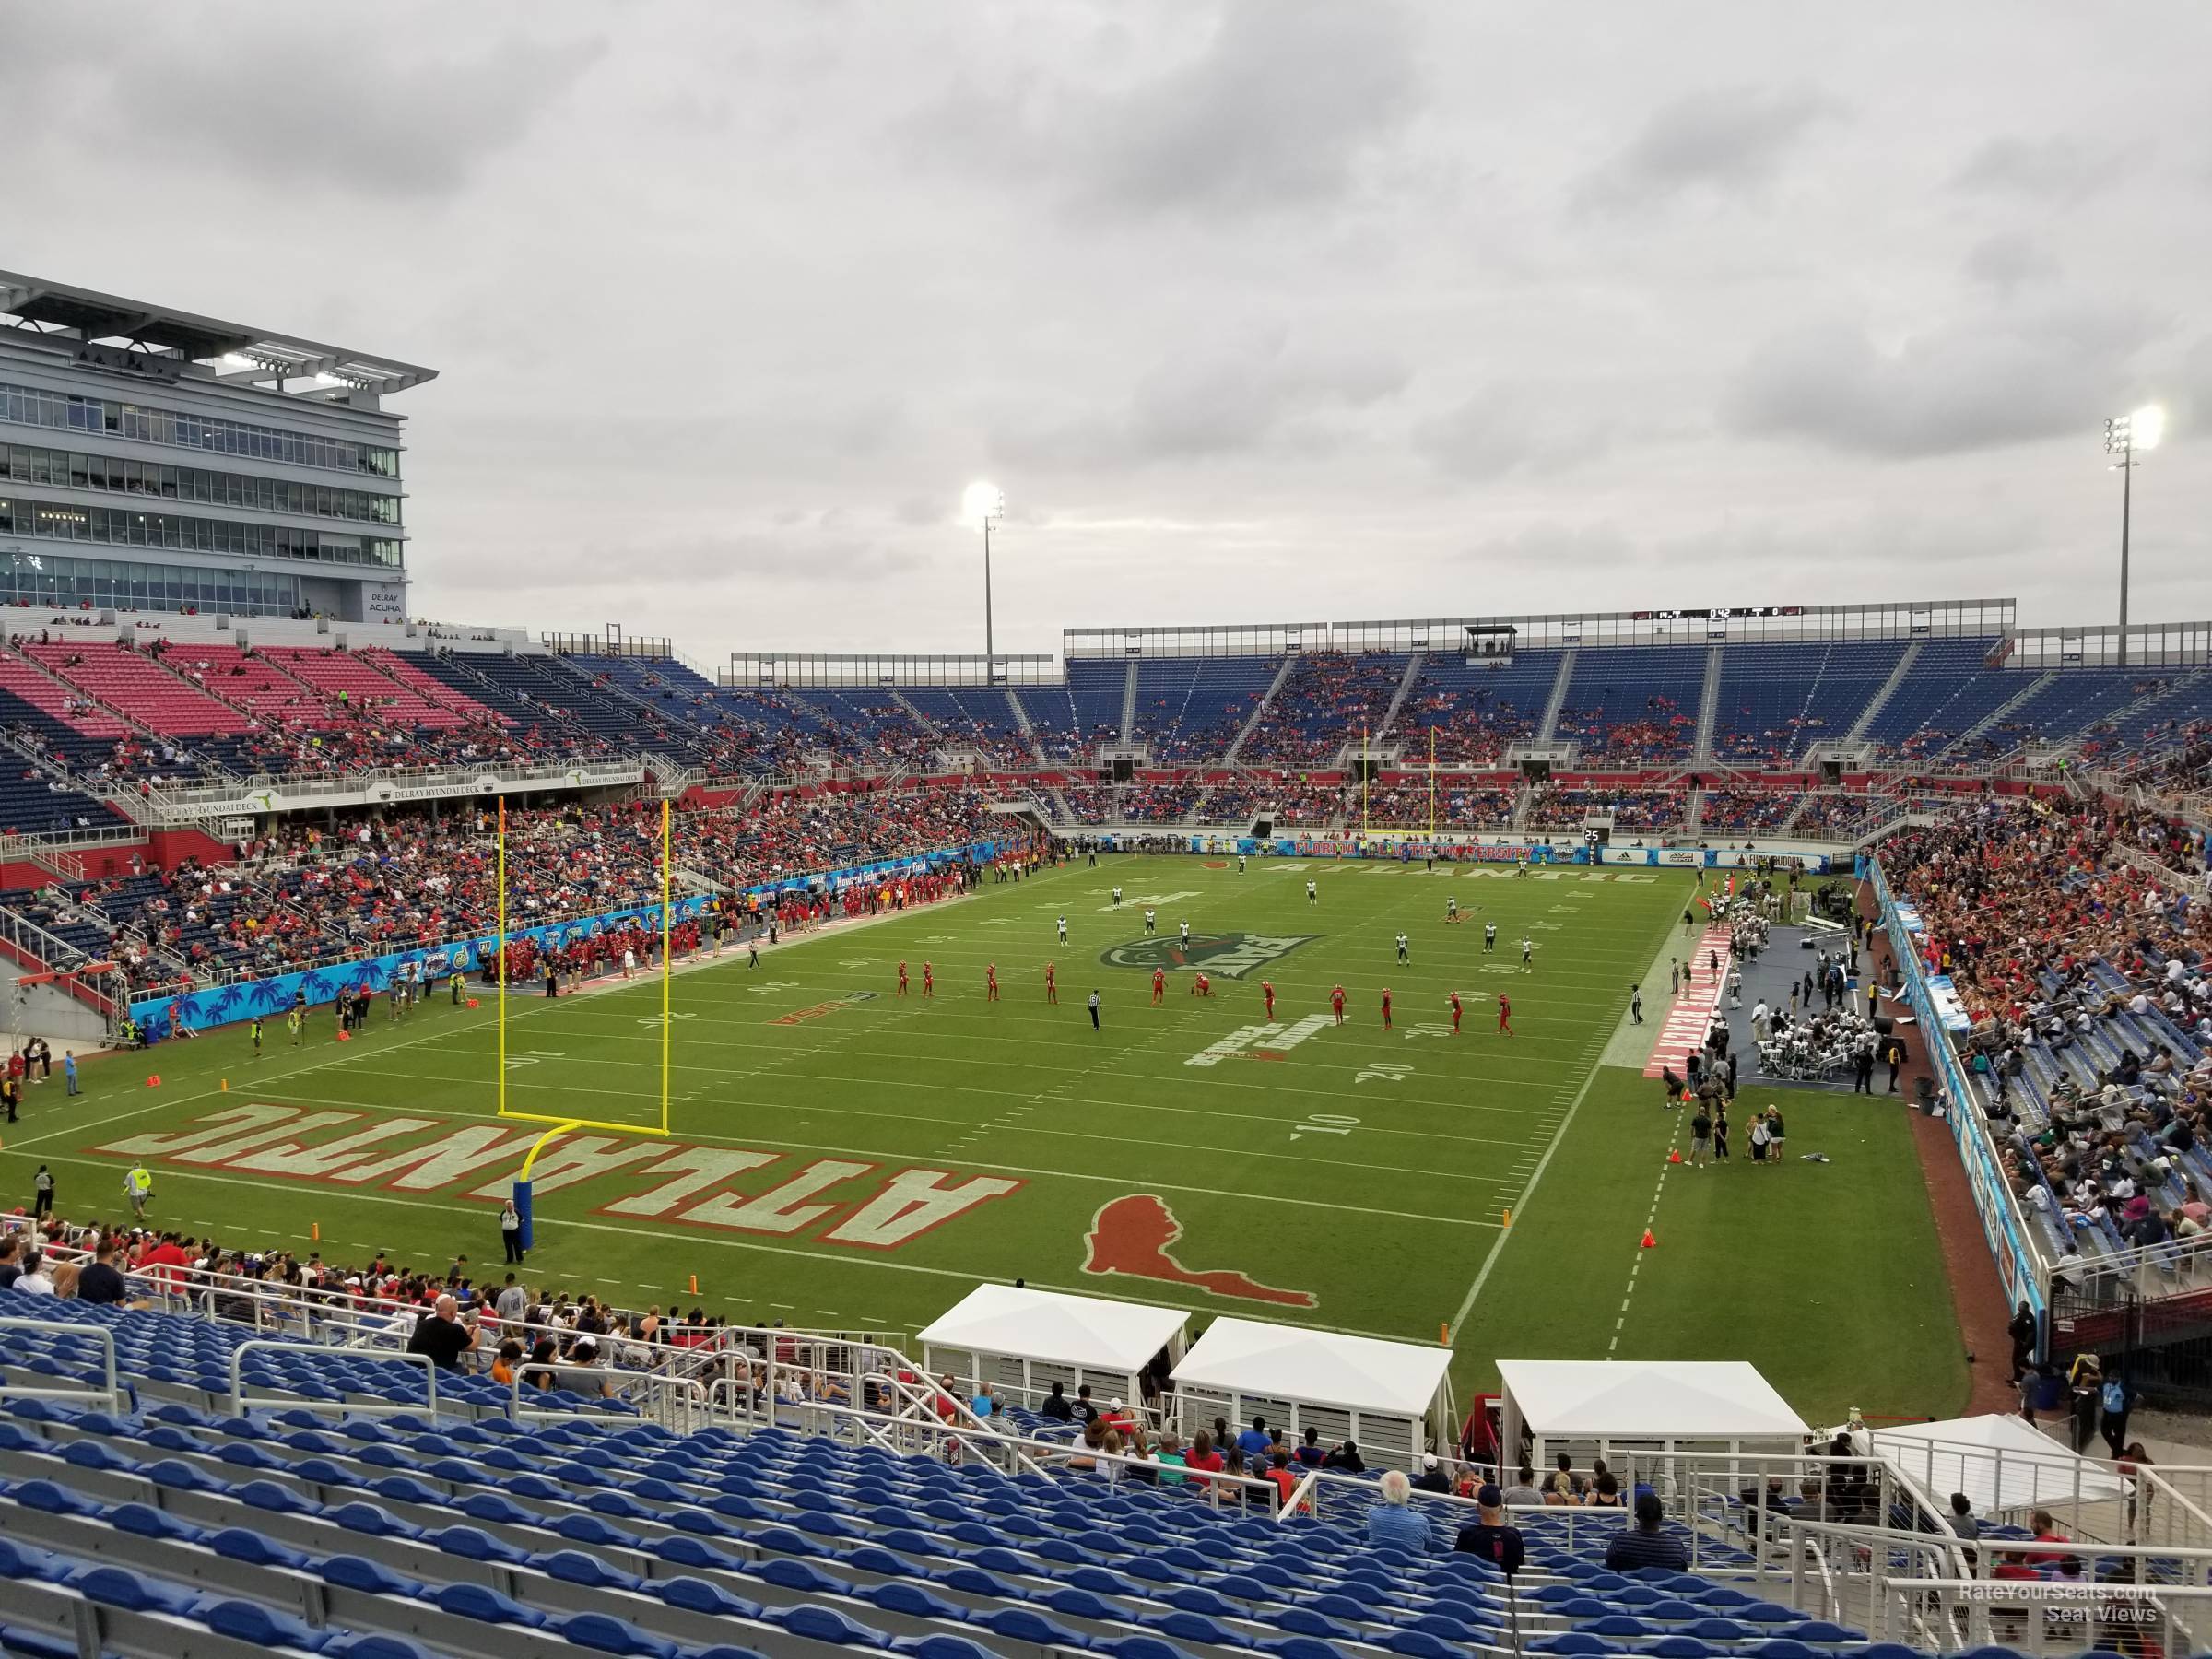 section 232, row t seat view  - fau stadium